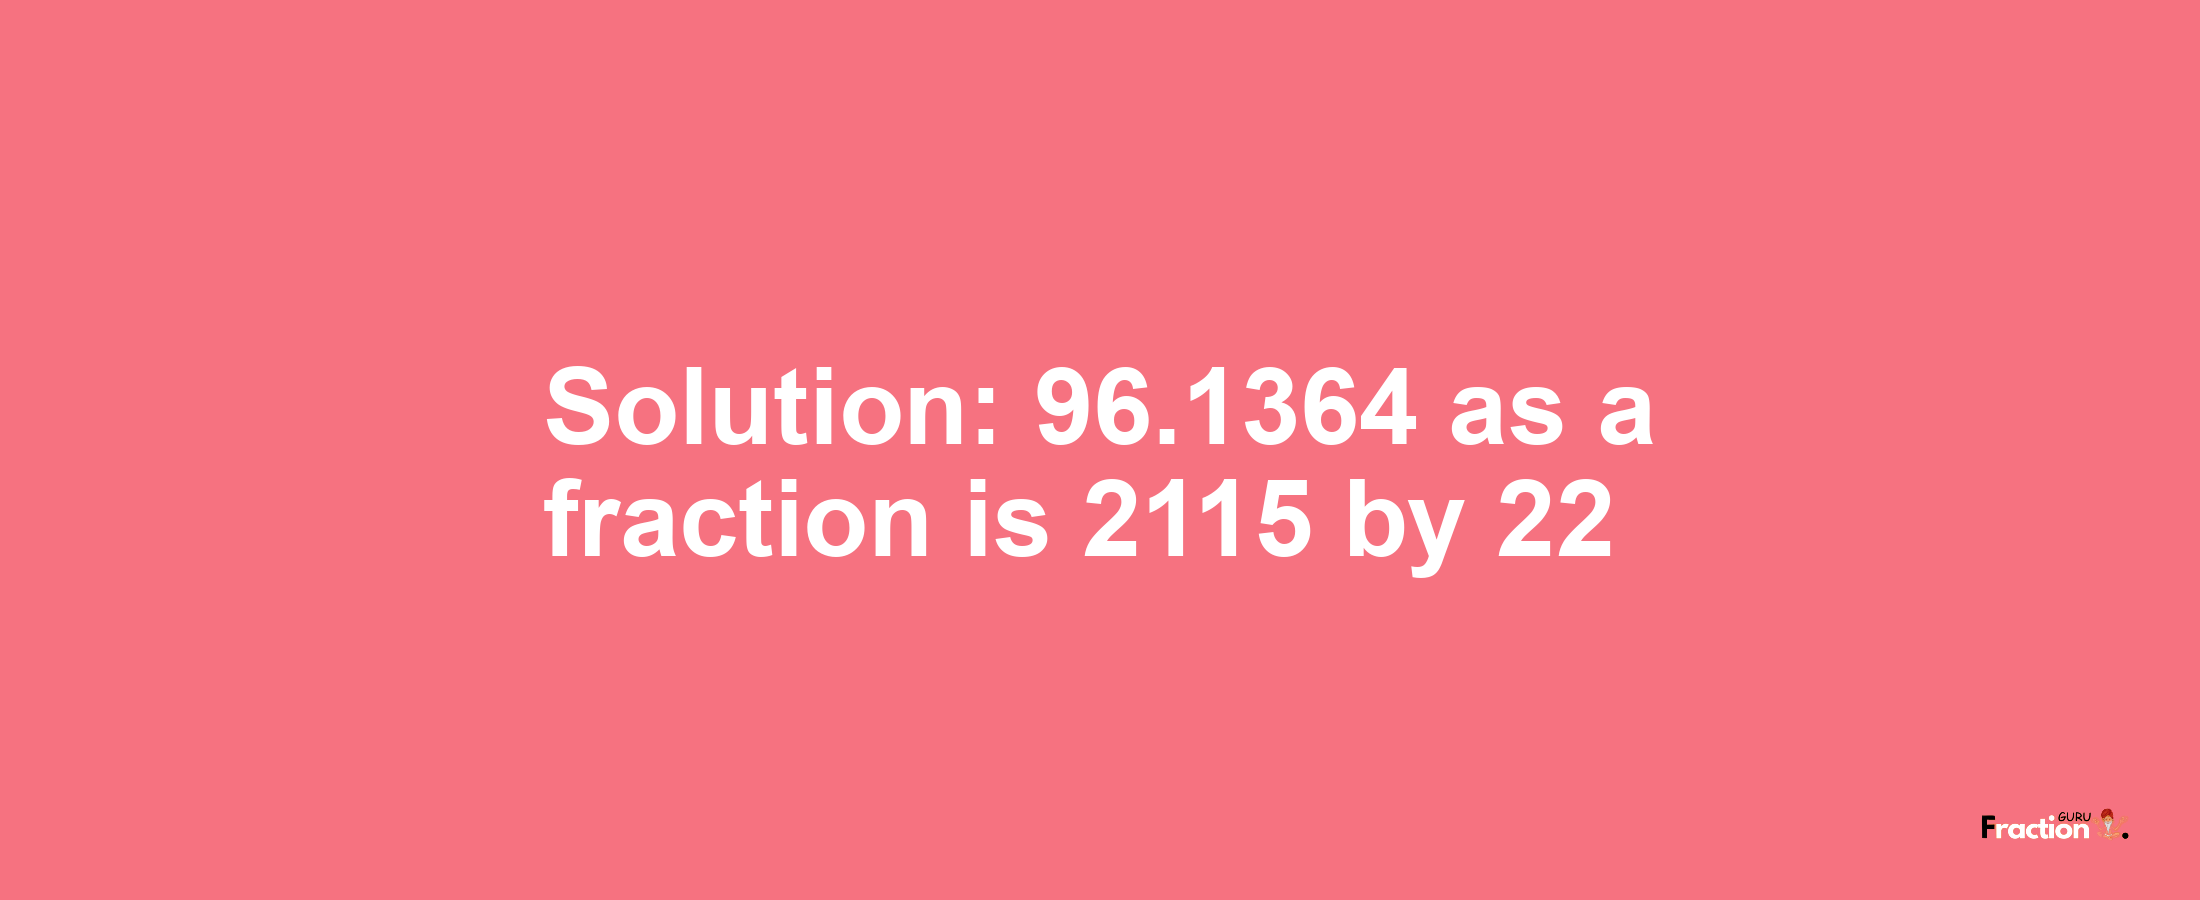 Solution:96.1364 as a fraction is 2115/22